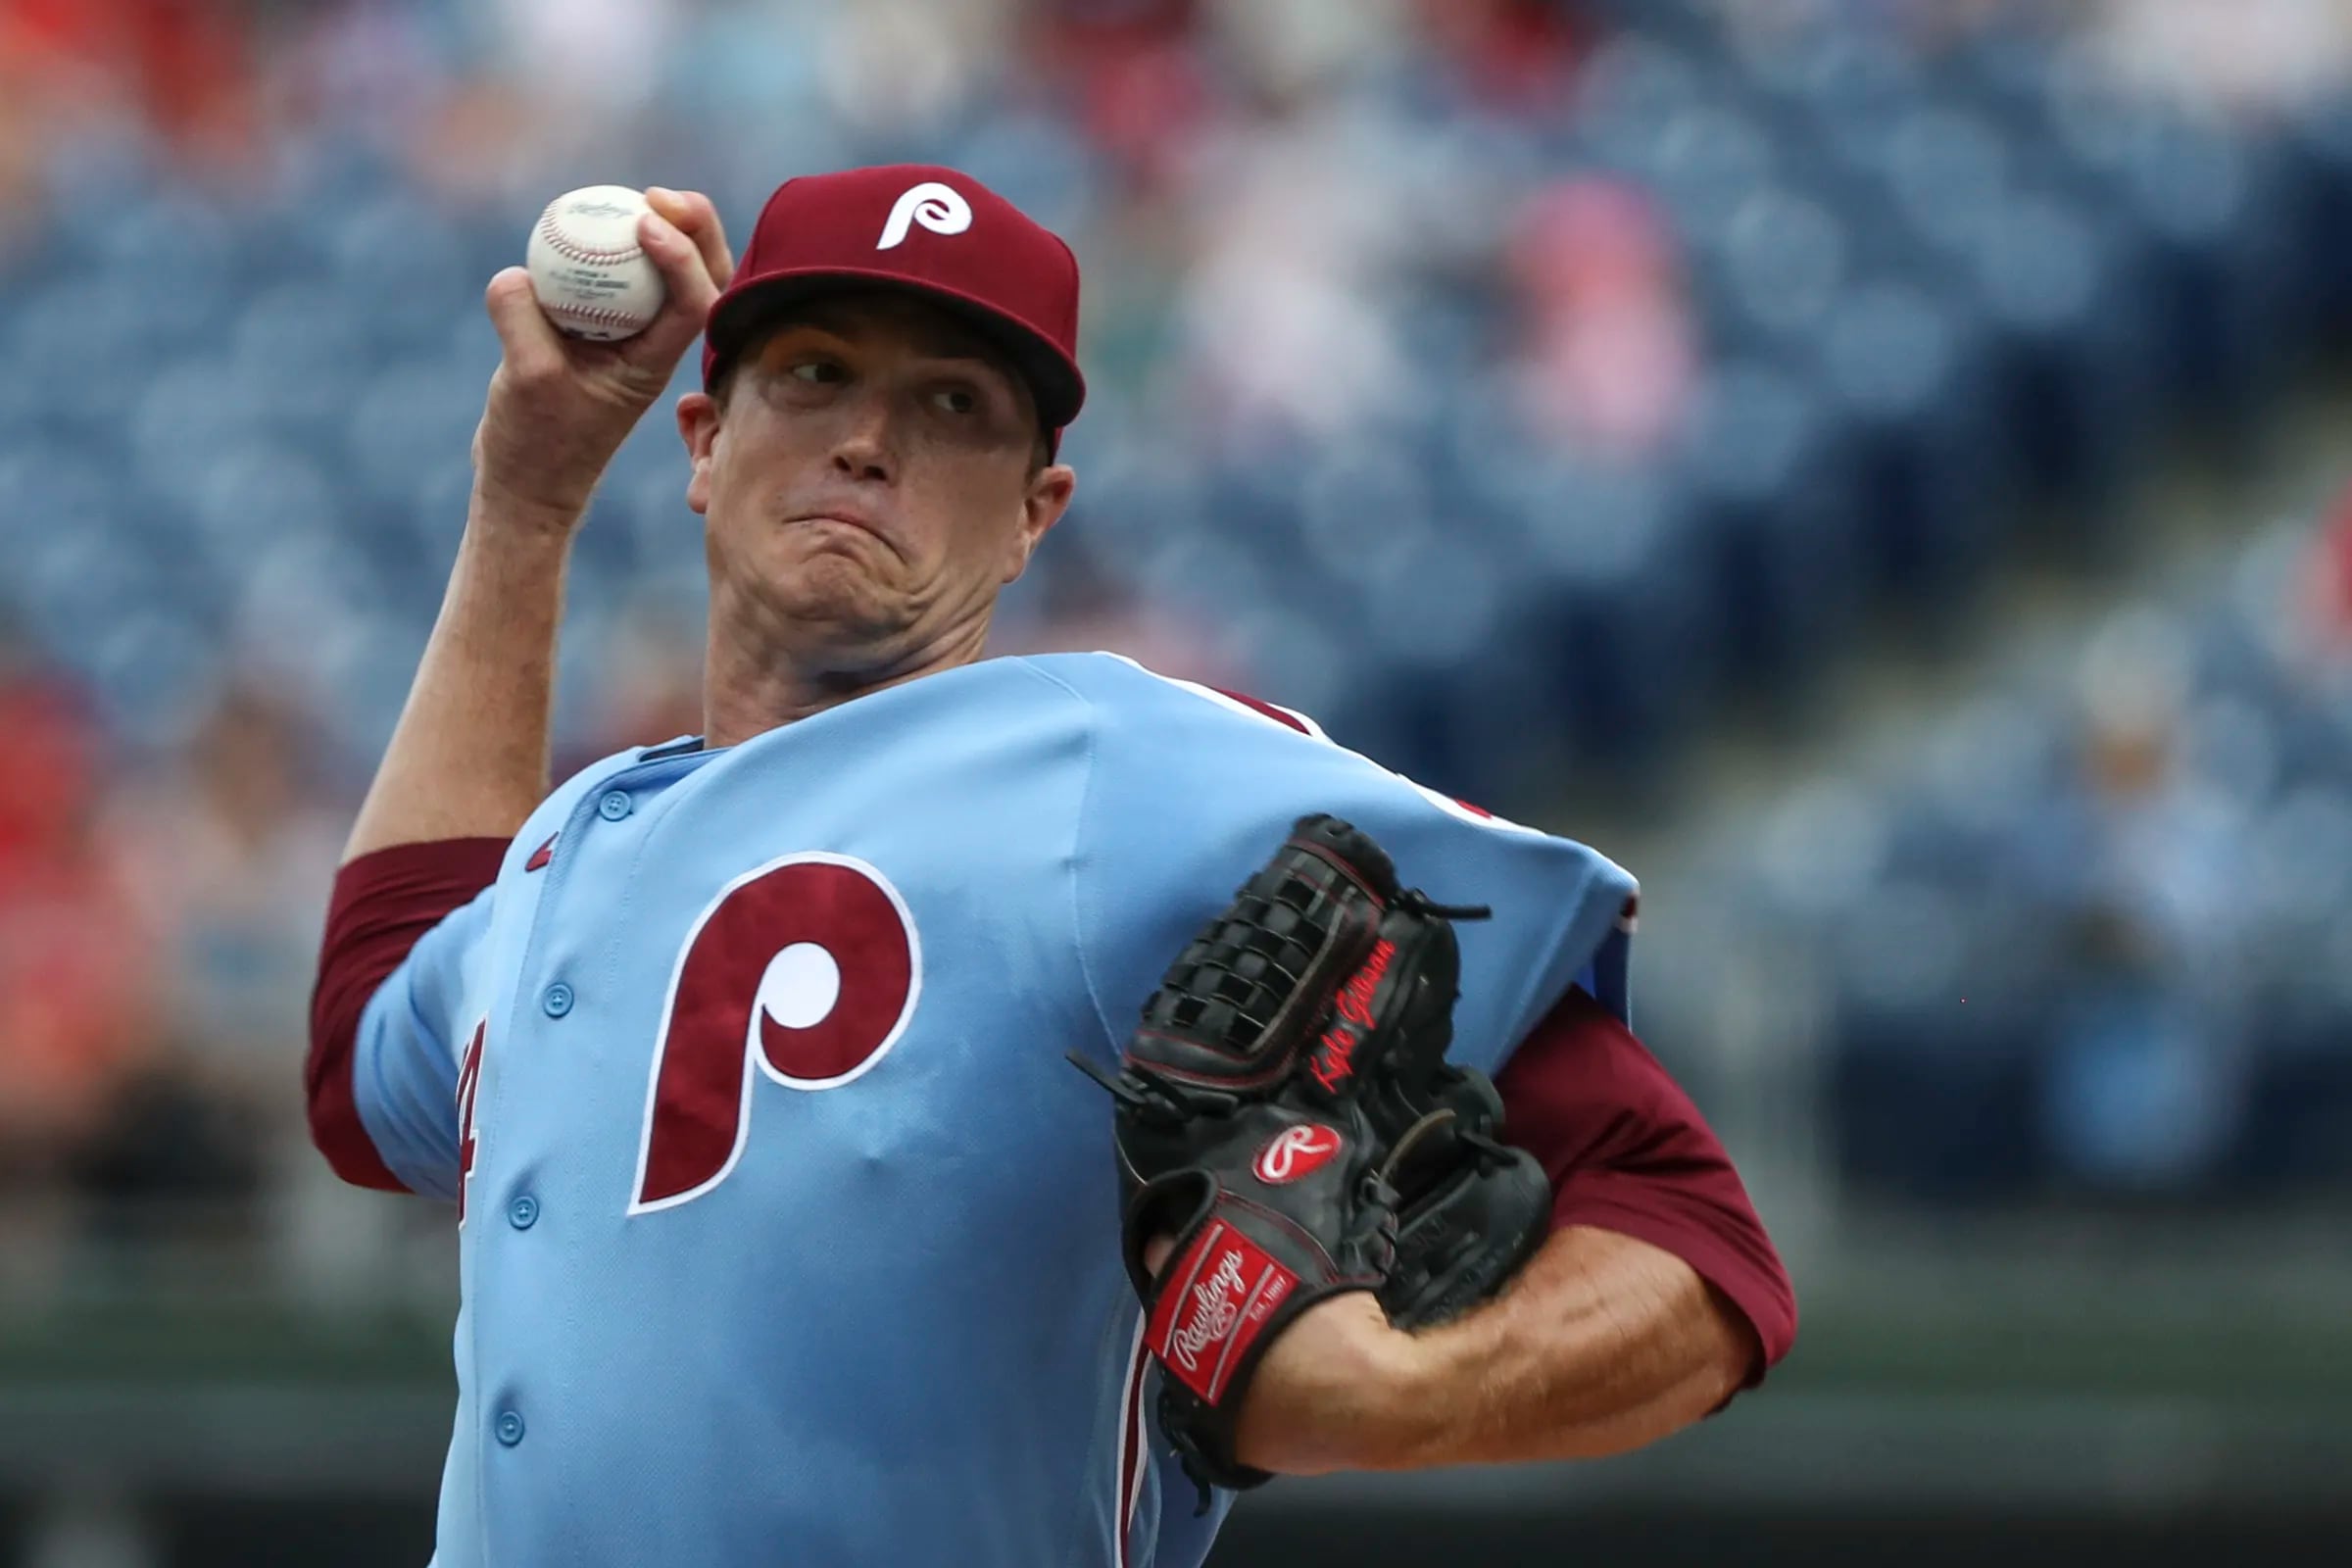 Photos of the Phillies' 3-0 loss to the Marlins